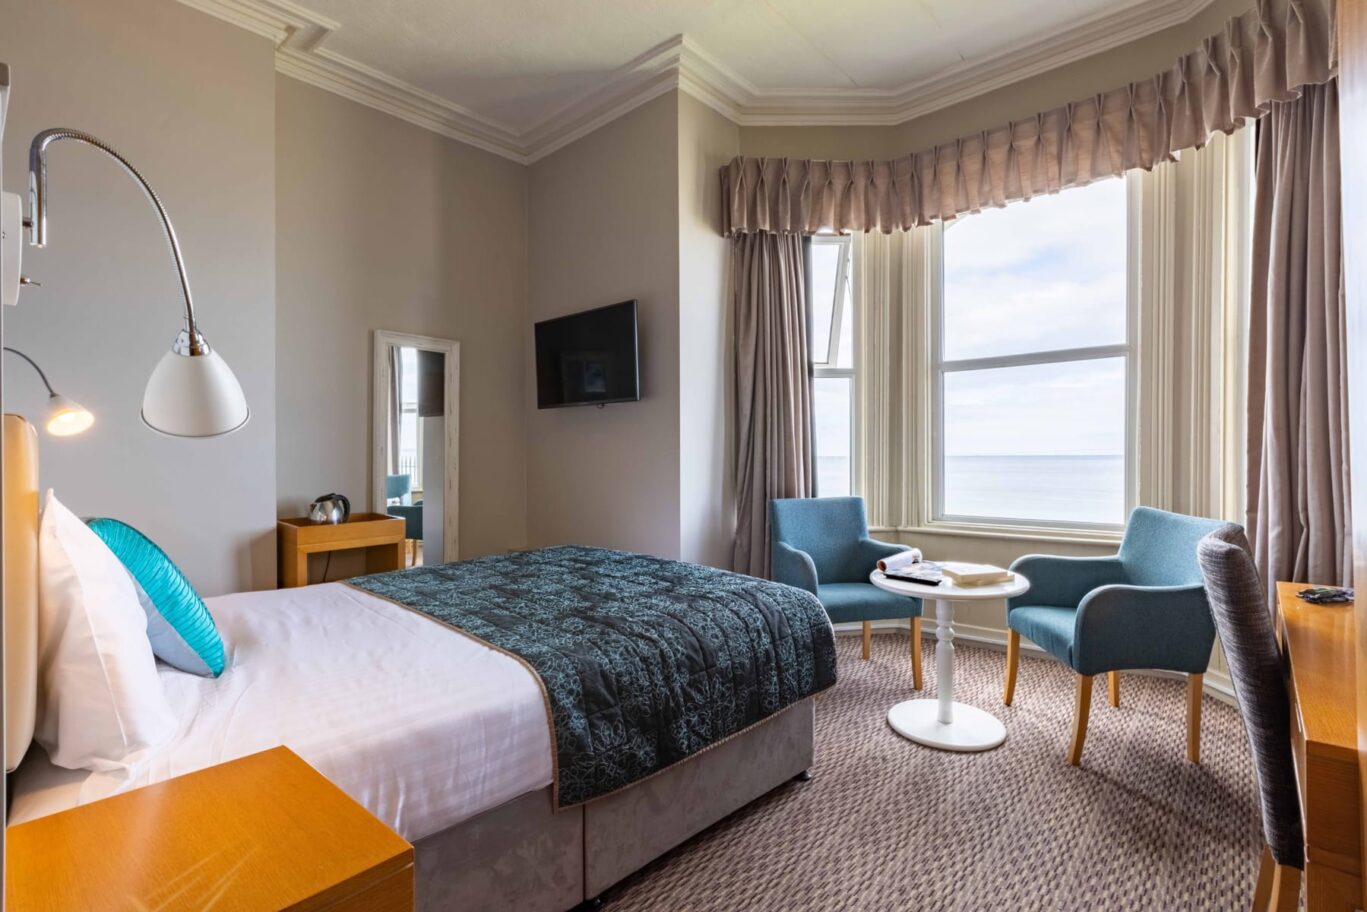 Why You Should Visit a Seafront Hotel for a Short Break in the New Year